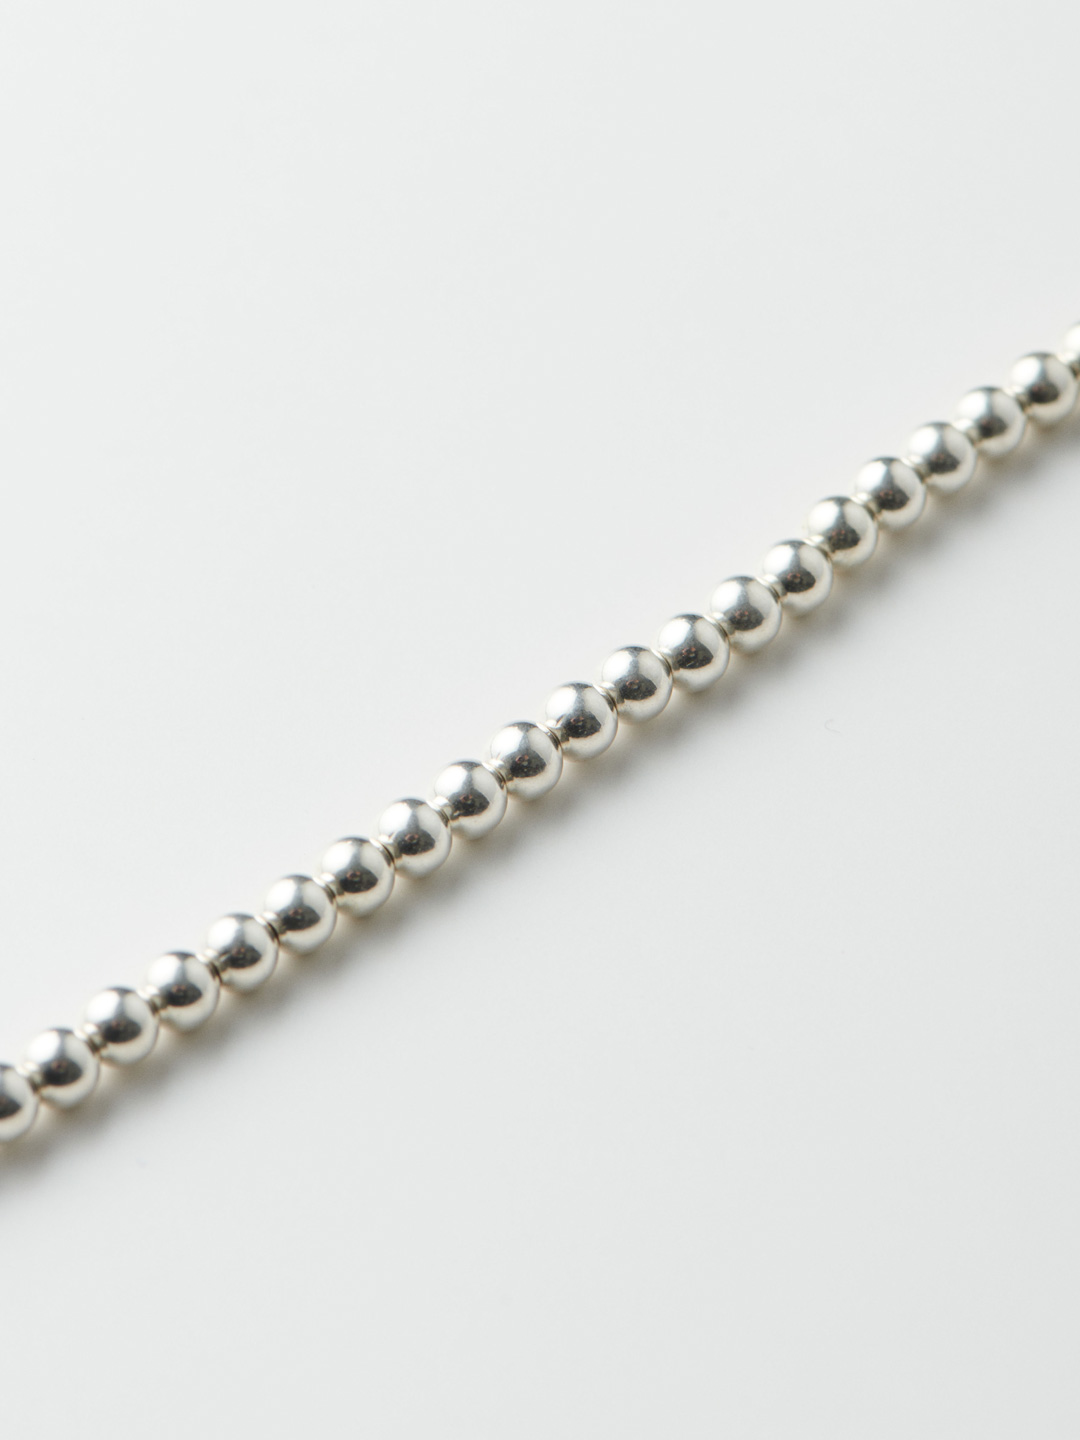 5mm Ball Chain Necklace 40cm - Silver